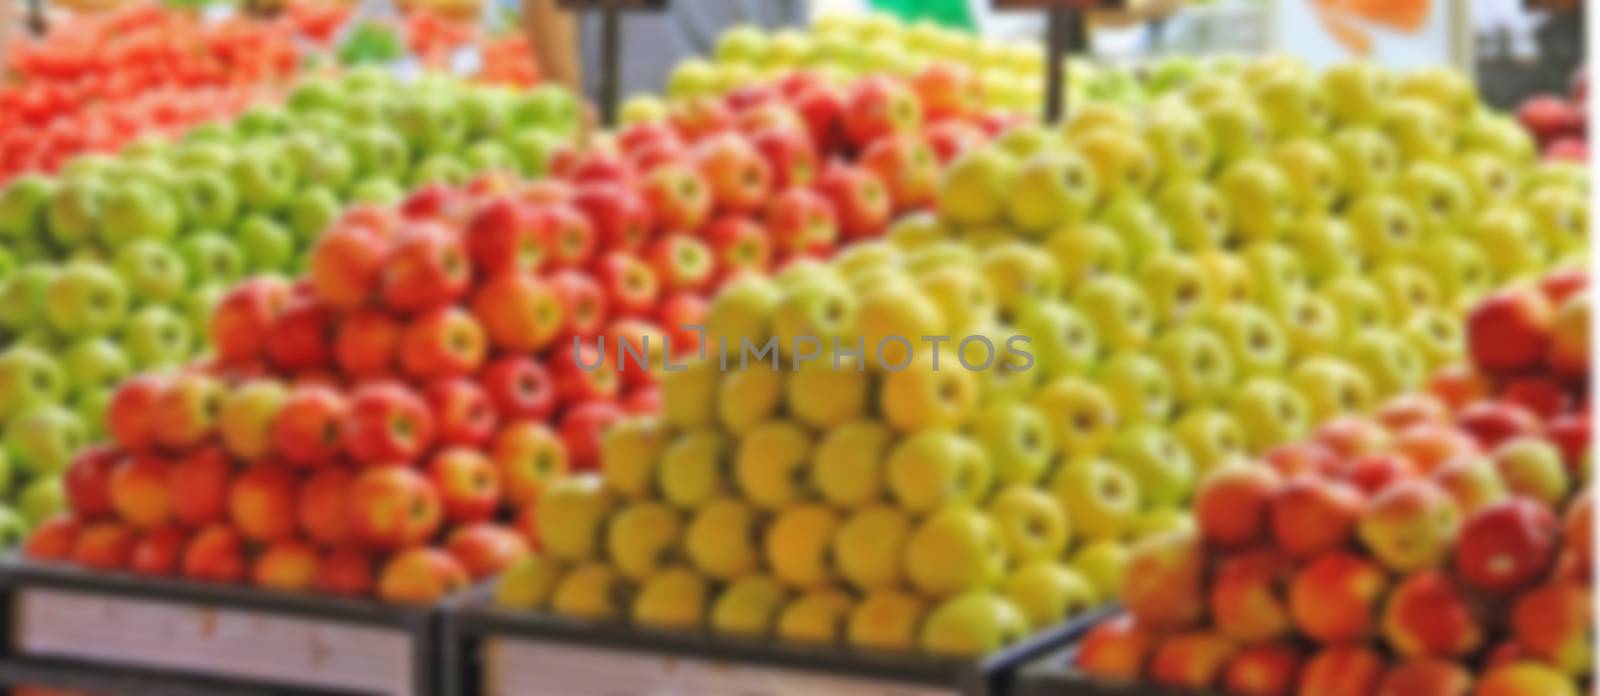 apples on the counter retail sales, green and red fruits for healthy pitaniyamyagky focus blurred background